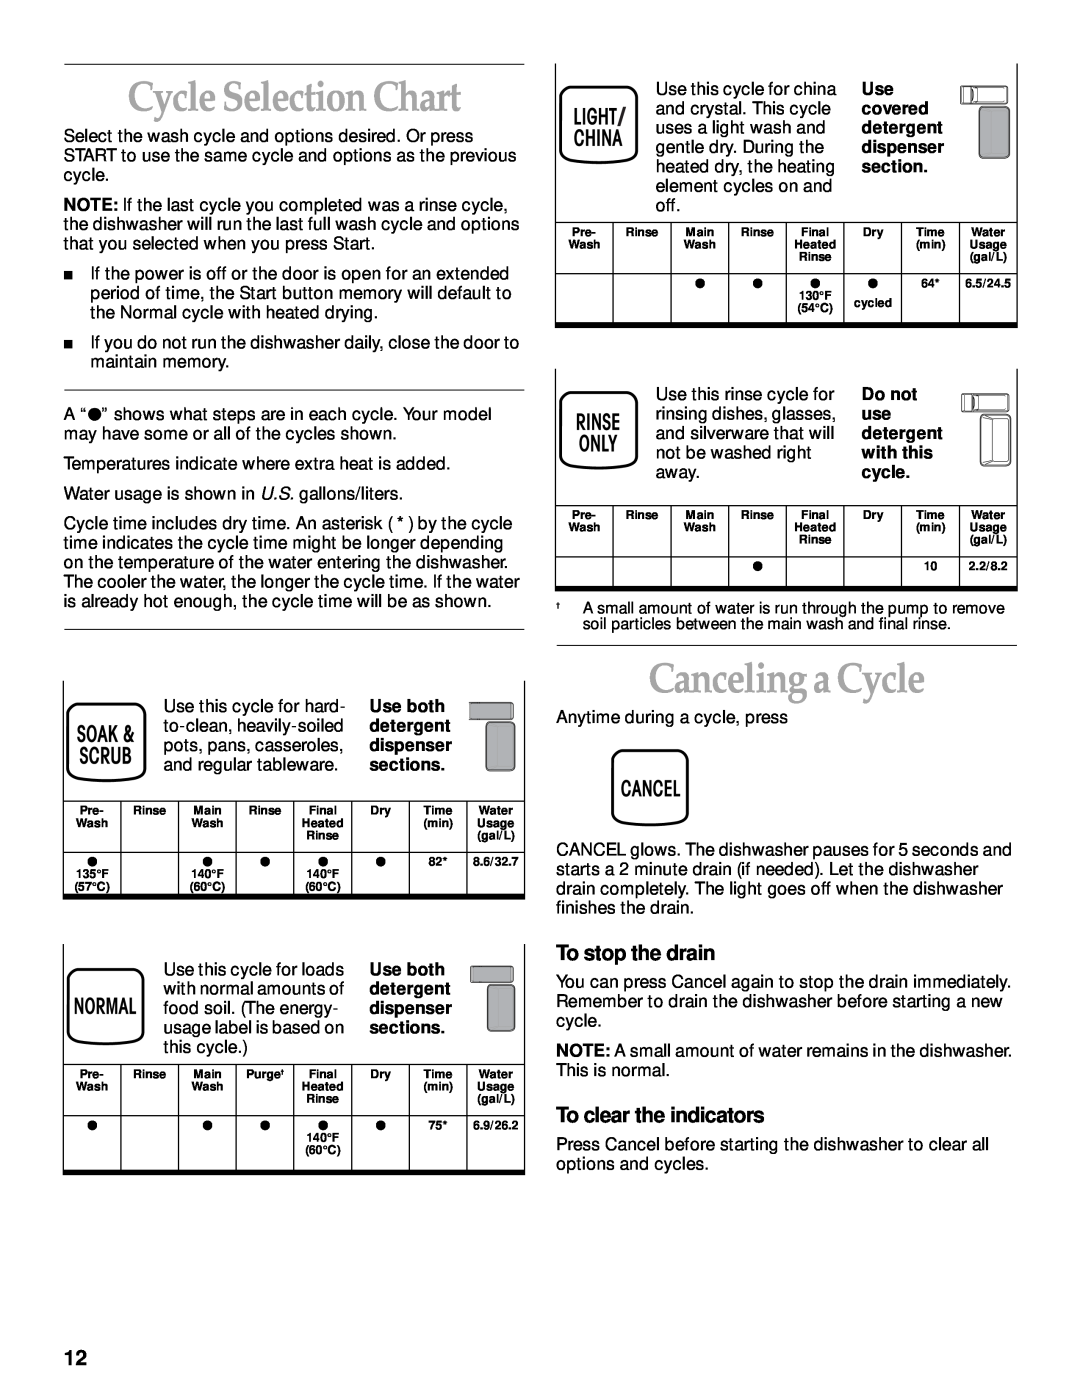 KitchenAid KUDI25CH Cycle Selection Chart, Canceling a Cycle, To stop the drain, To clear the indicators, covered, section 